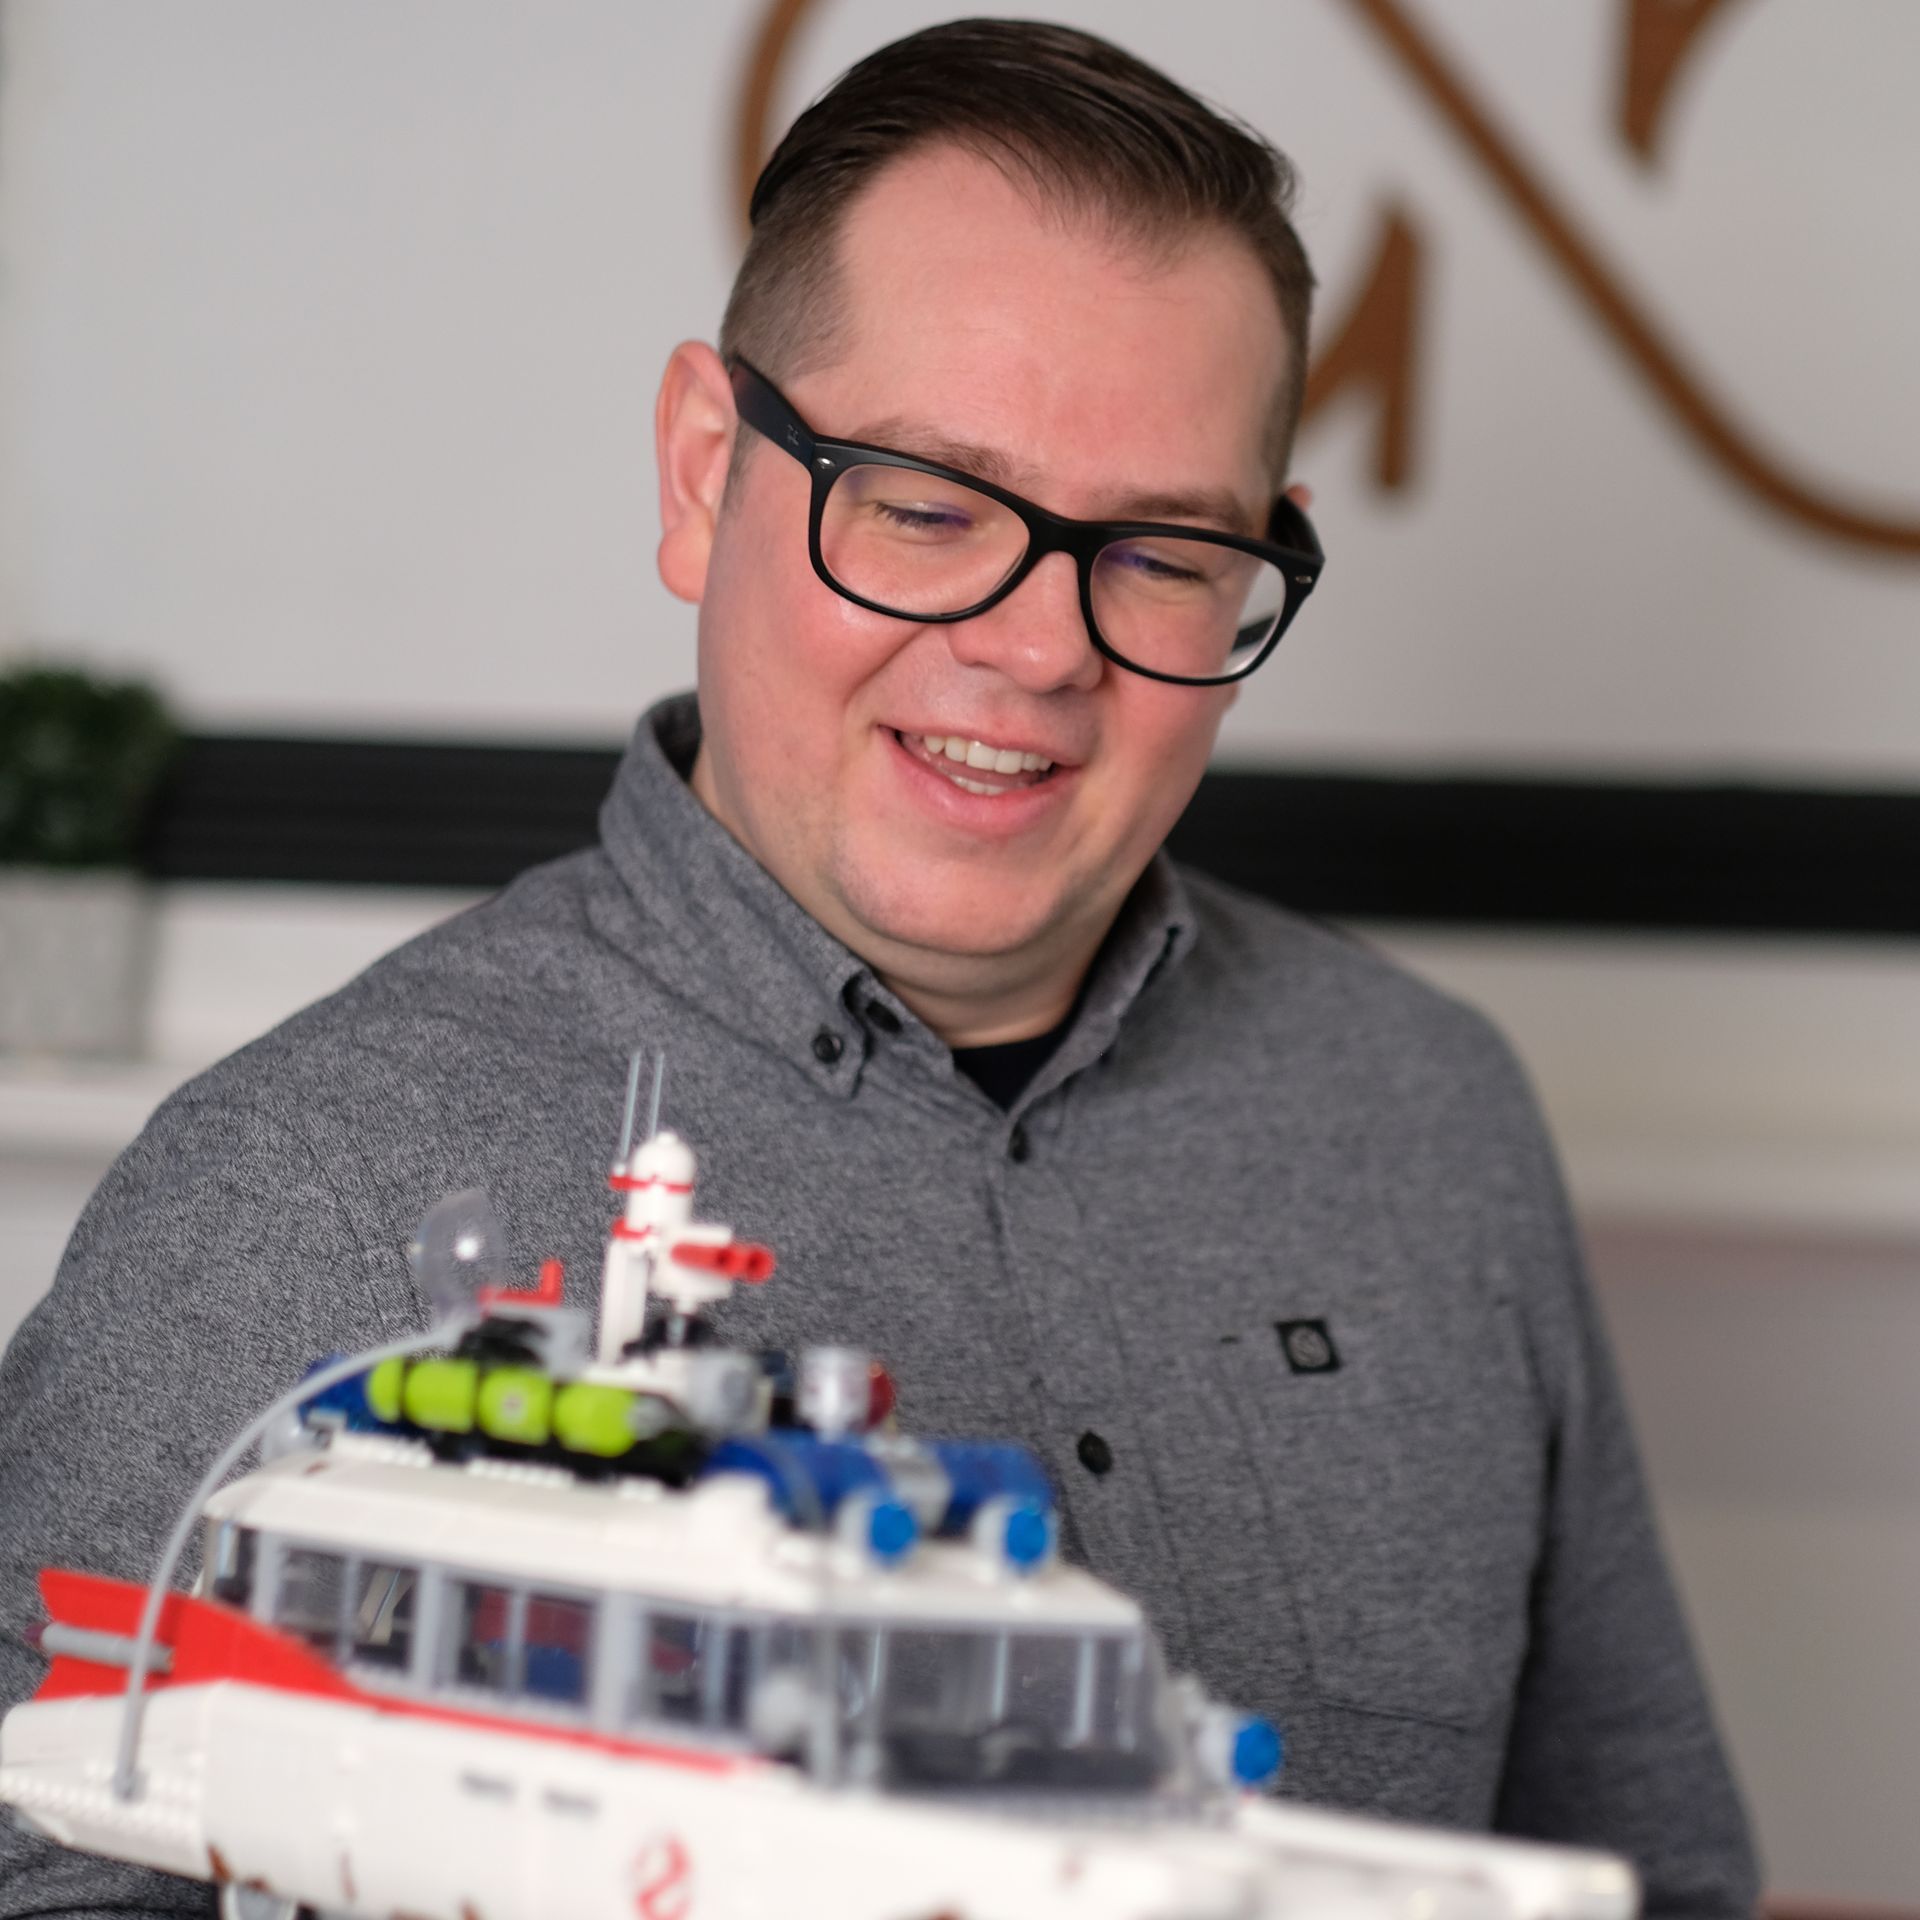 Headshot: a white man with dark hair and glasses holds up a lego model